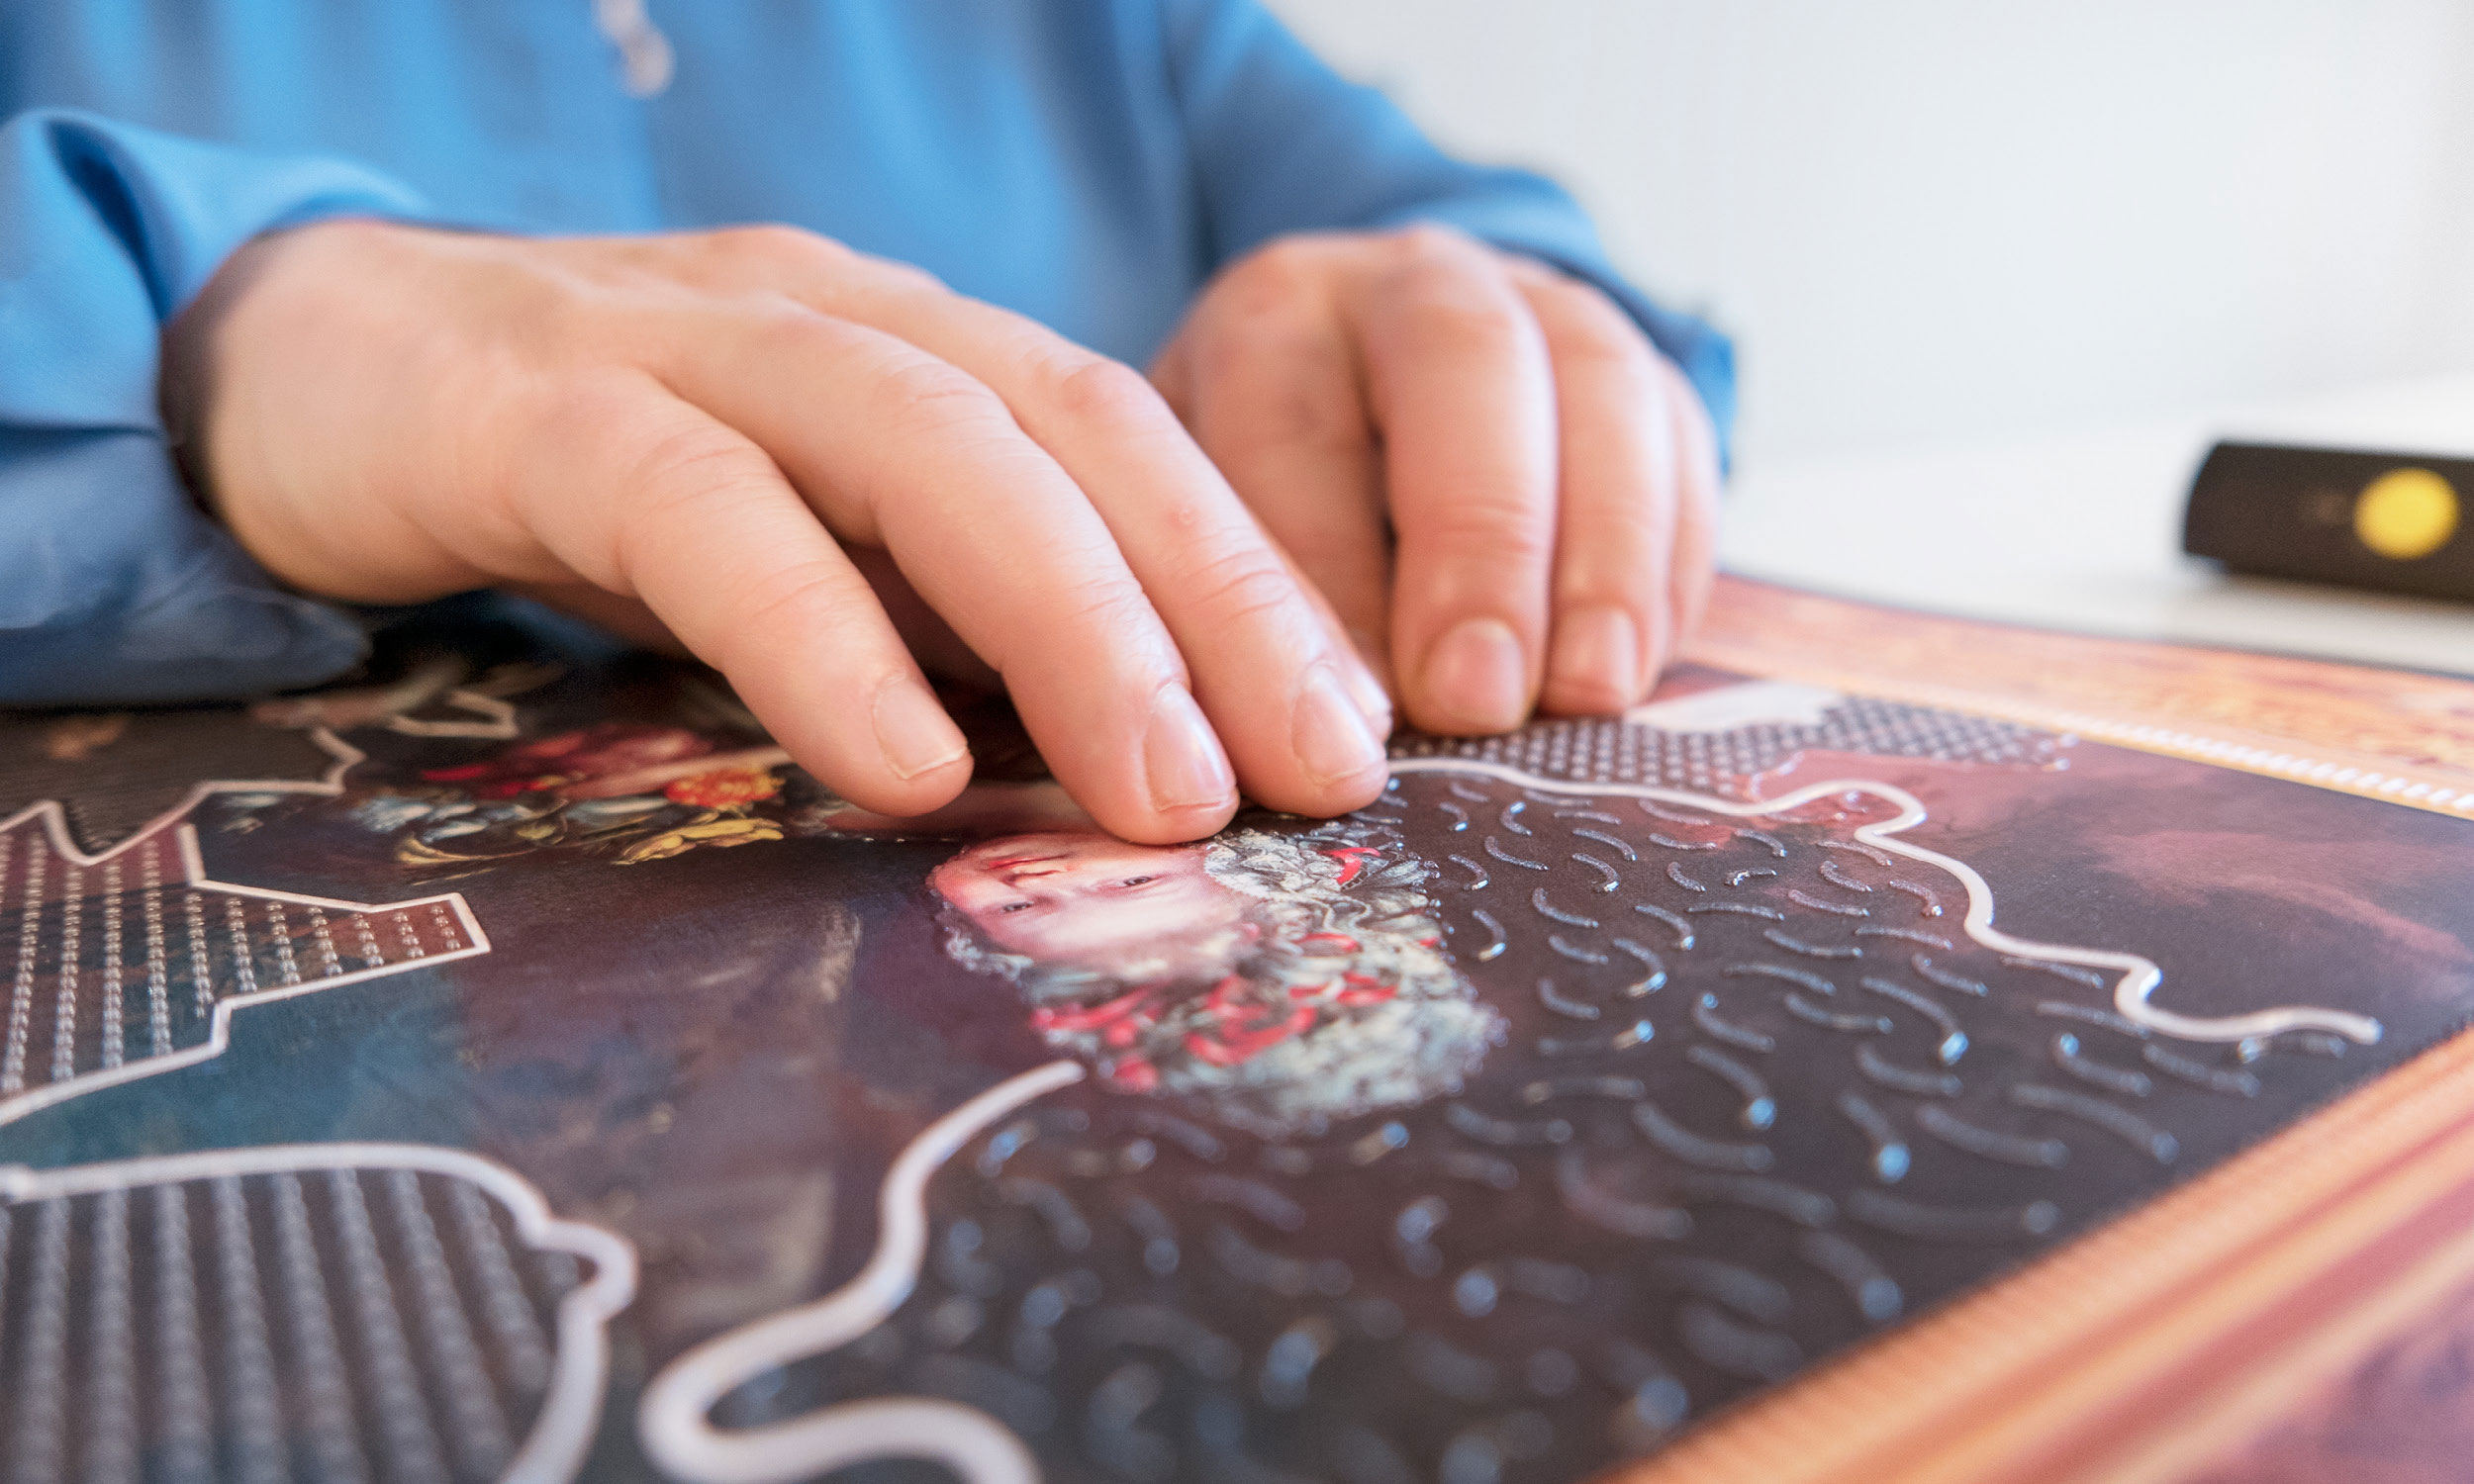 Detail photo of two hands scanning the surface of a tactile painting.